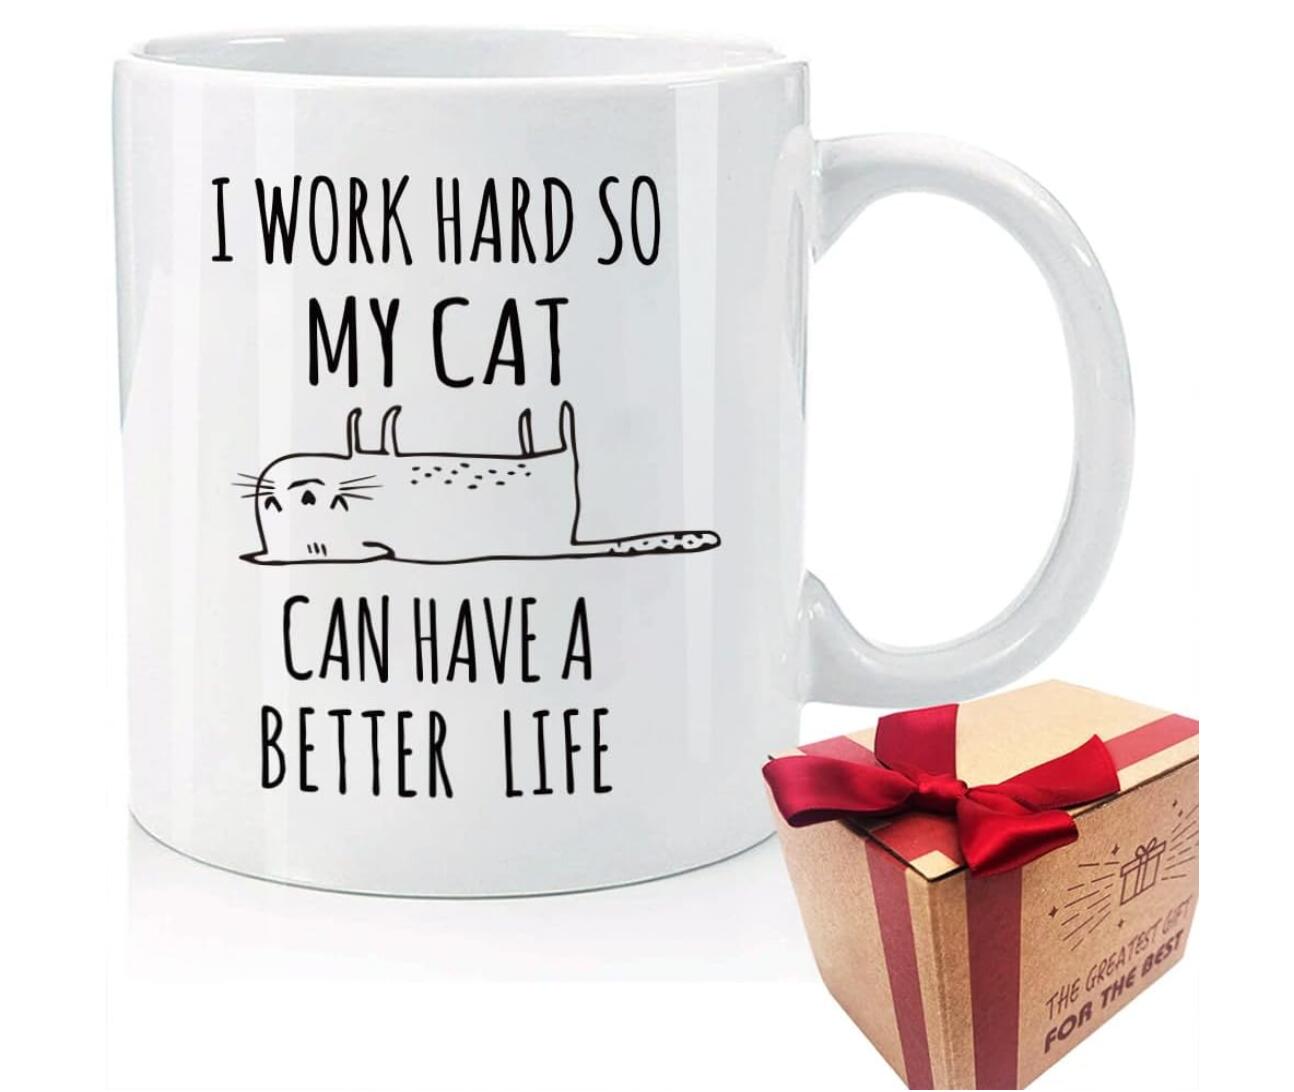 I Work Hard So That My Cat Can Have A Better Life Coffee Mug Pet Lovers Gift Cup